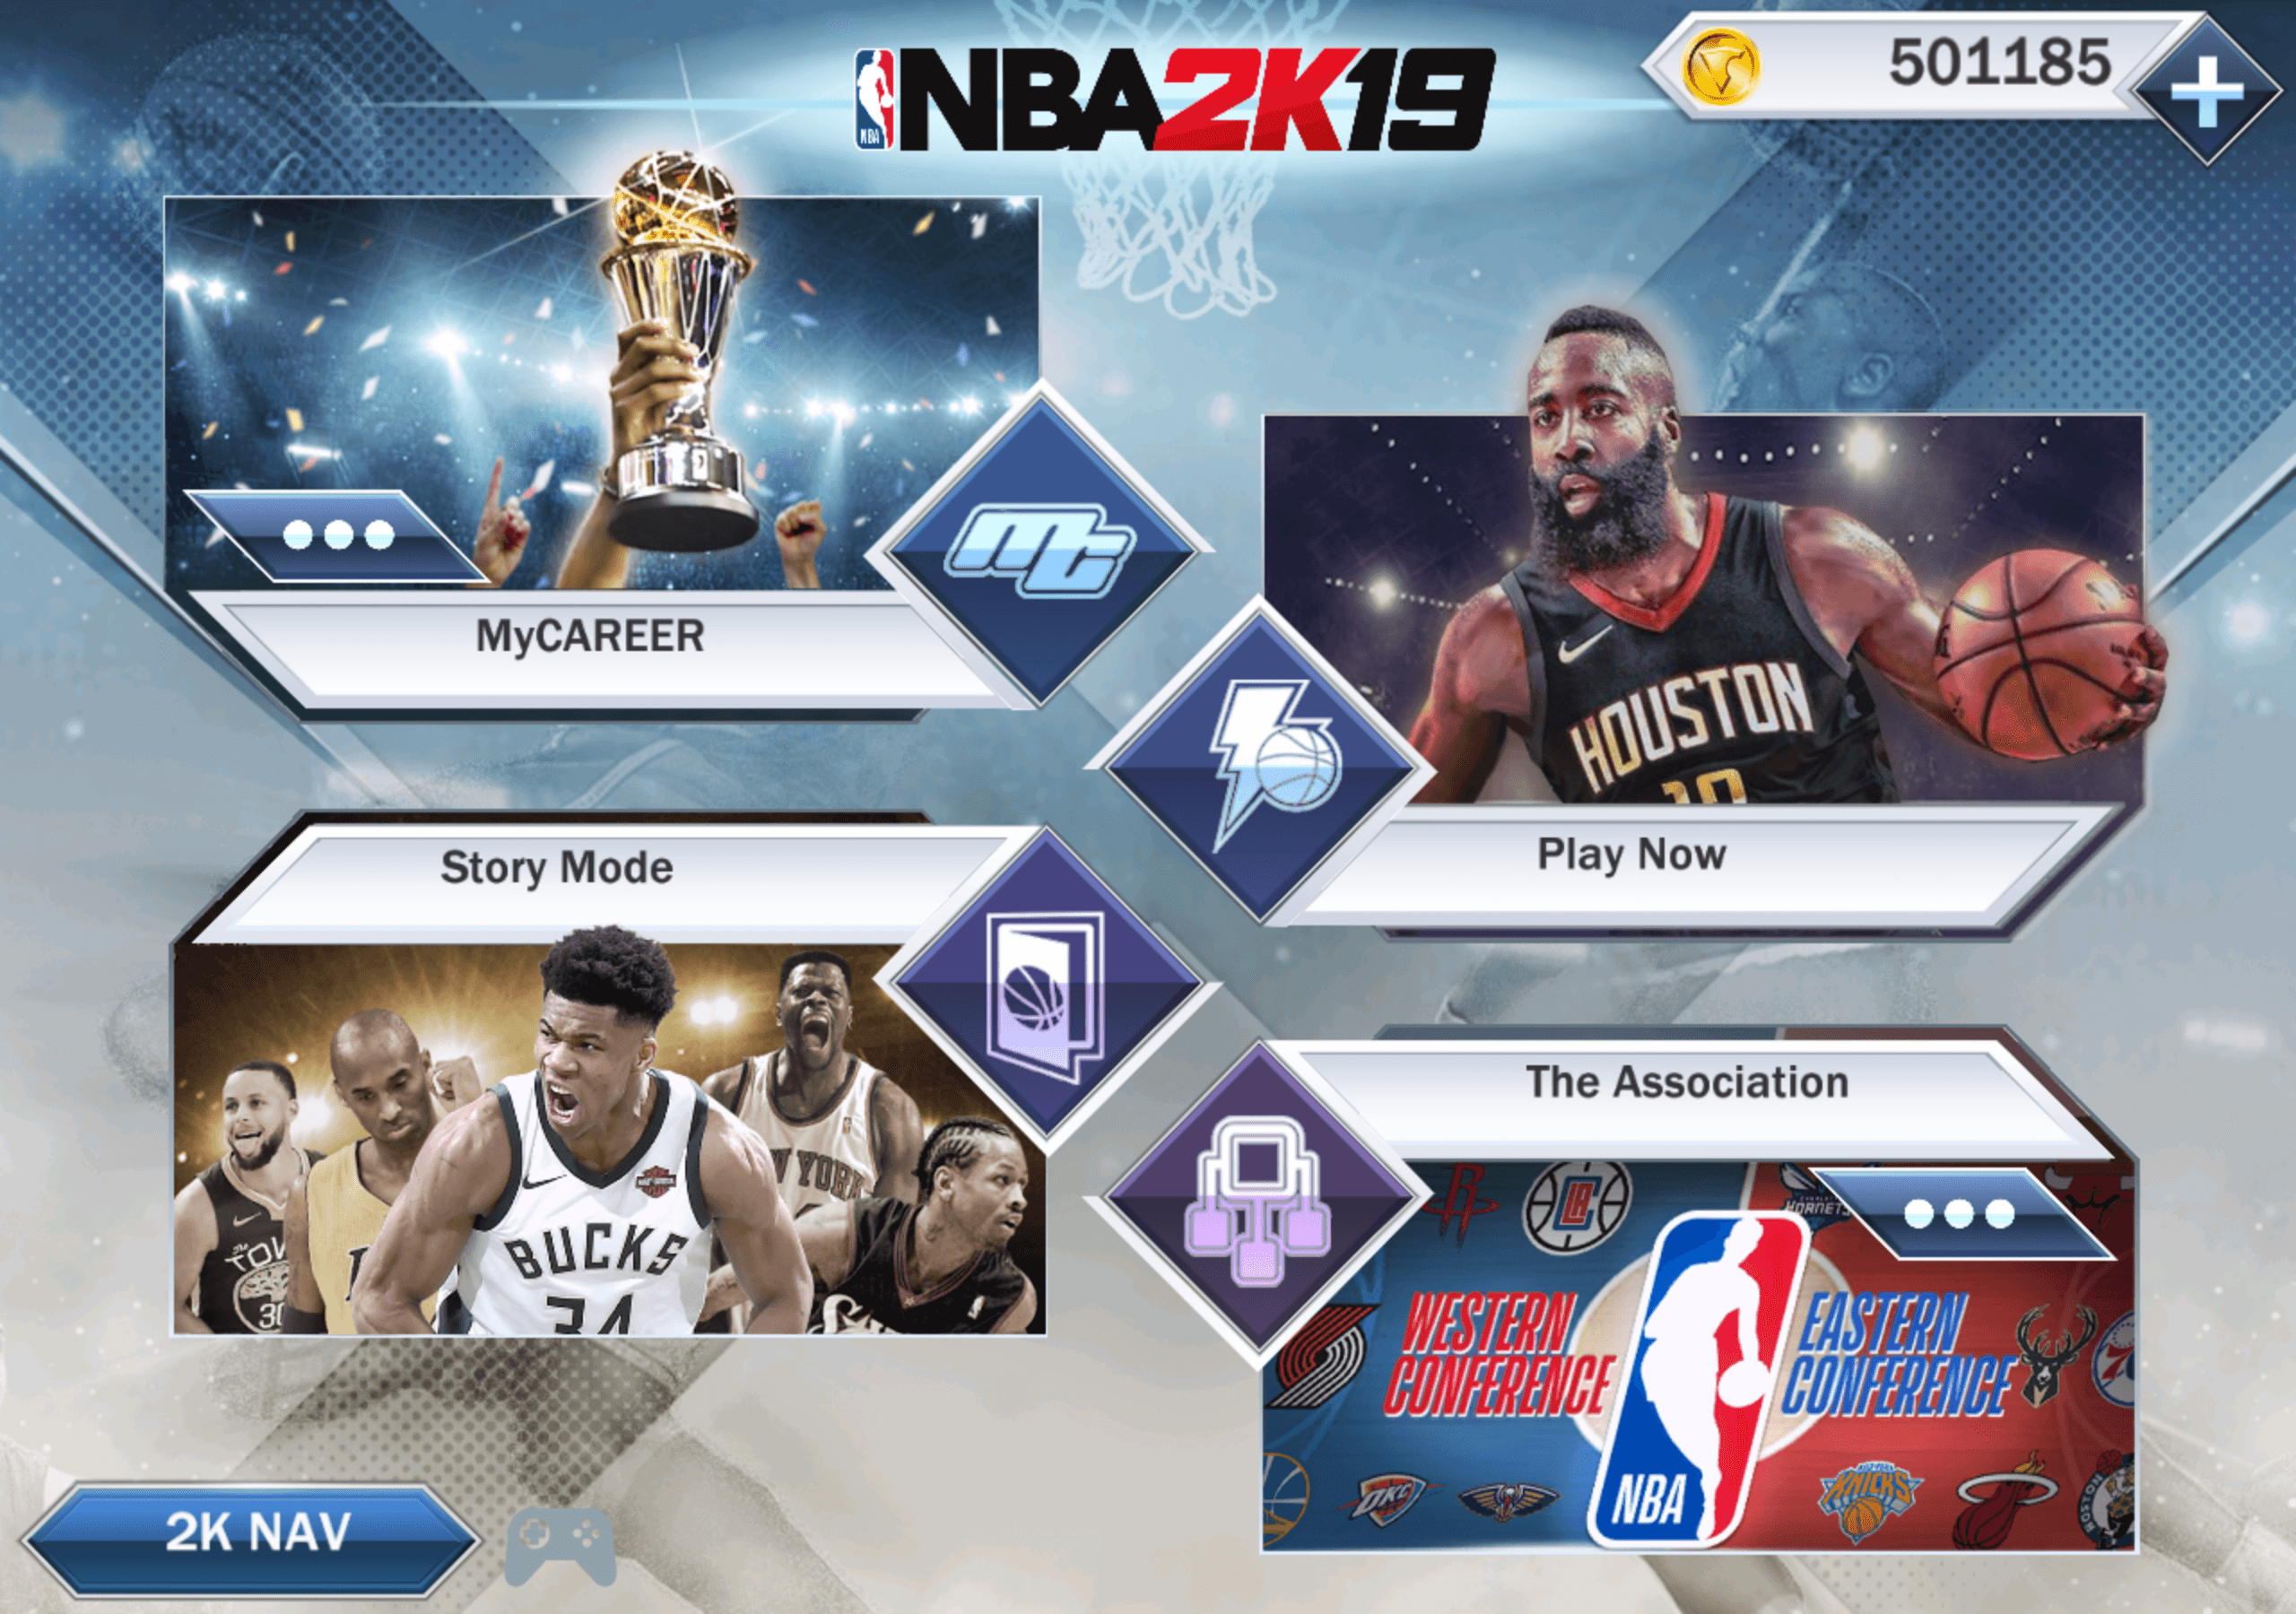 Download NBA2K19 on PC with BlueStacks